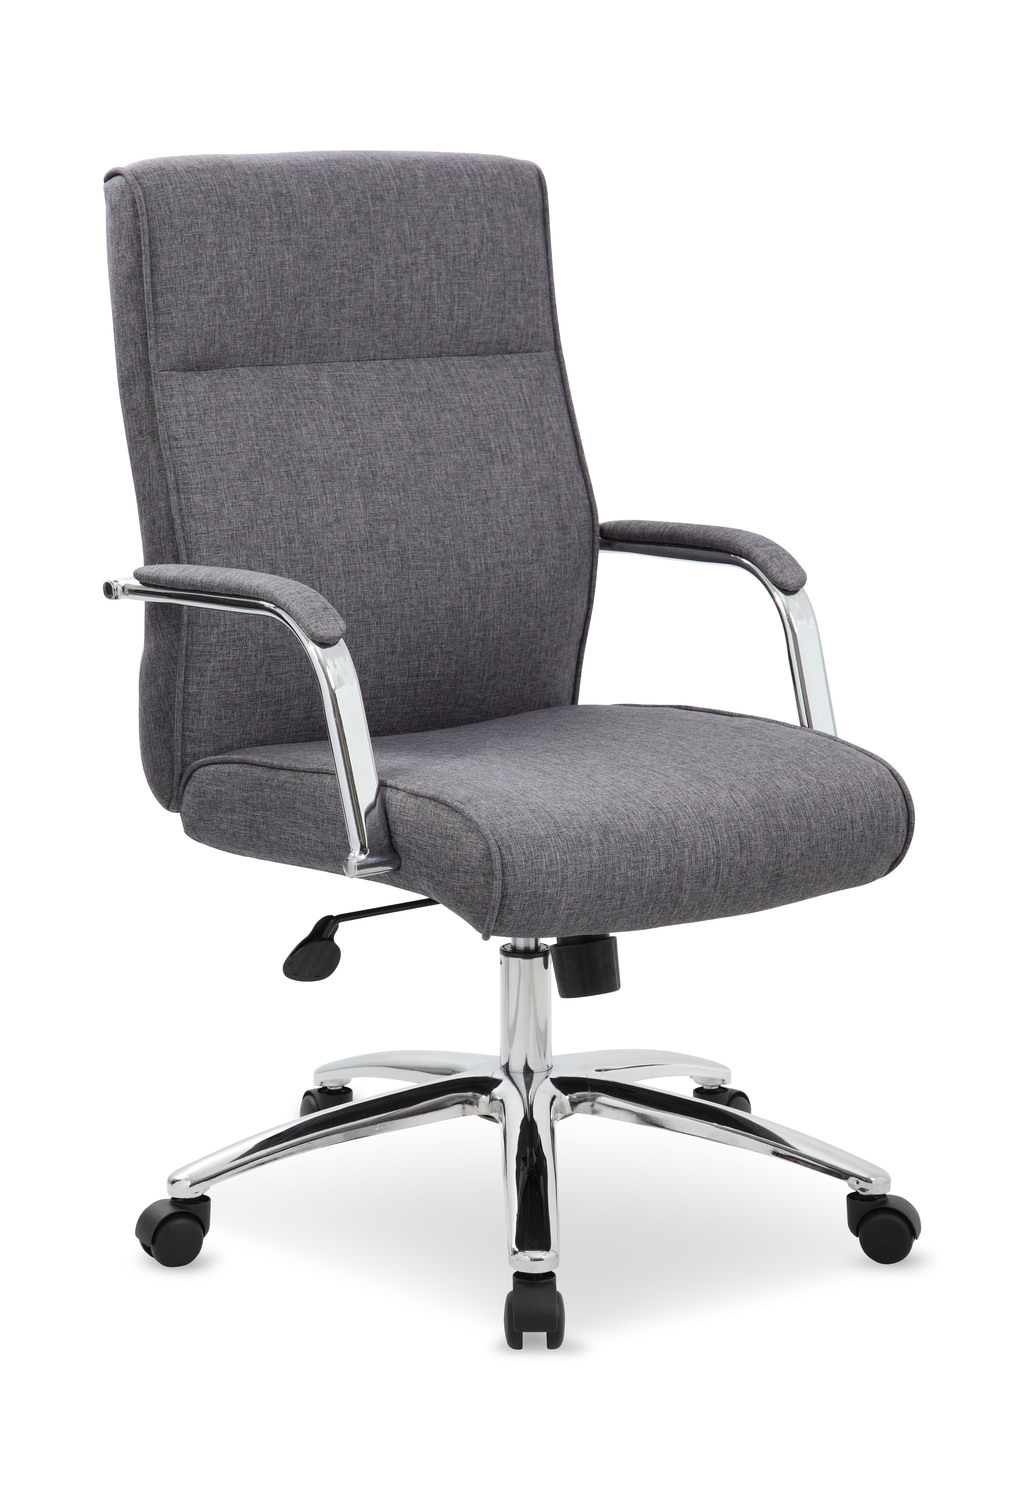 Executive Grey Office Chair by Thomas Cole HOM Furniture